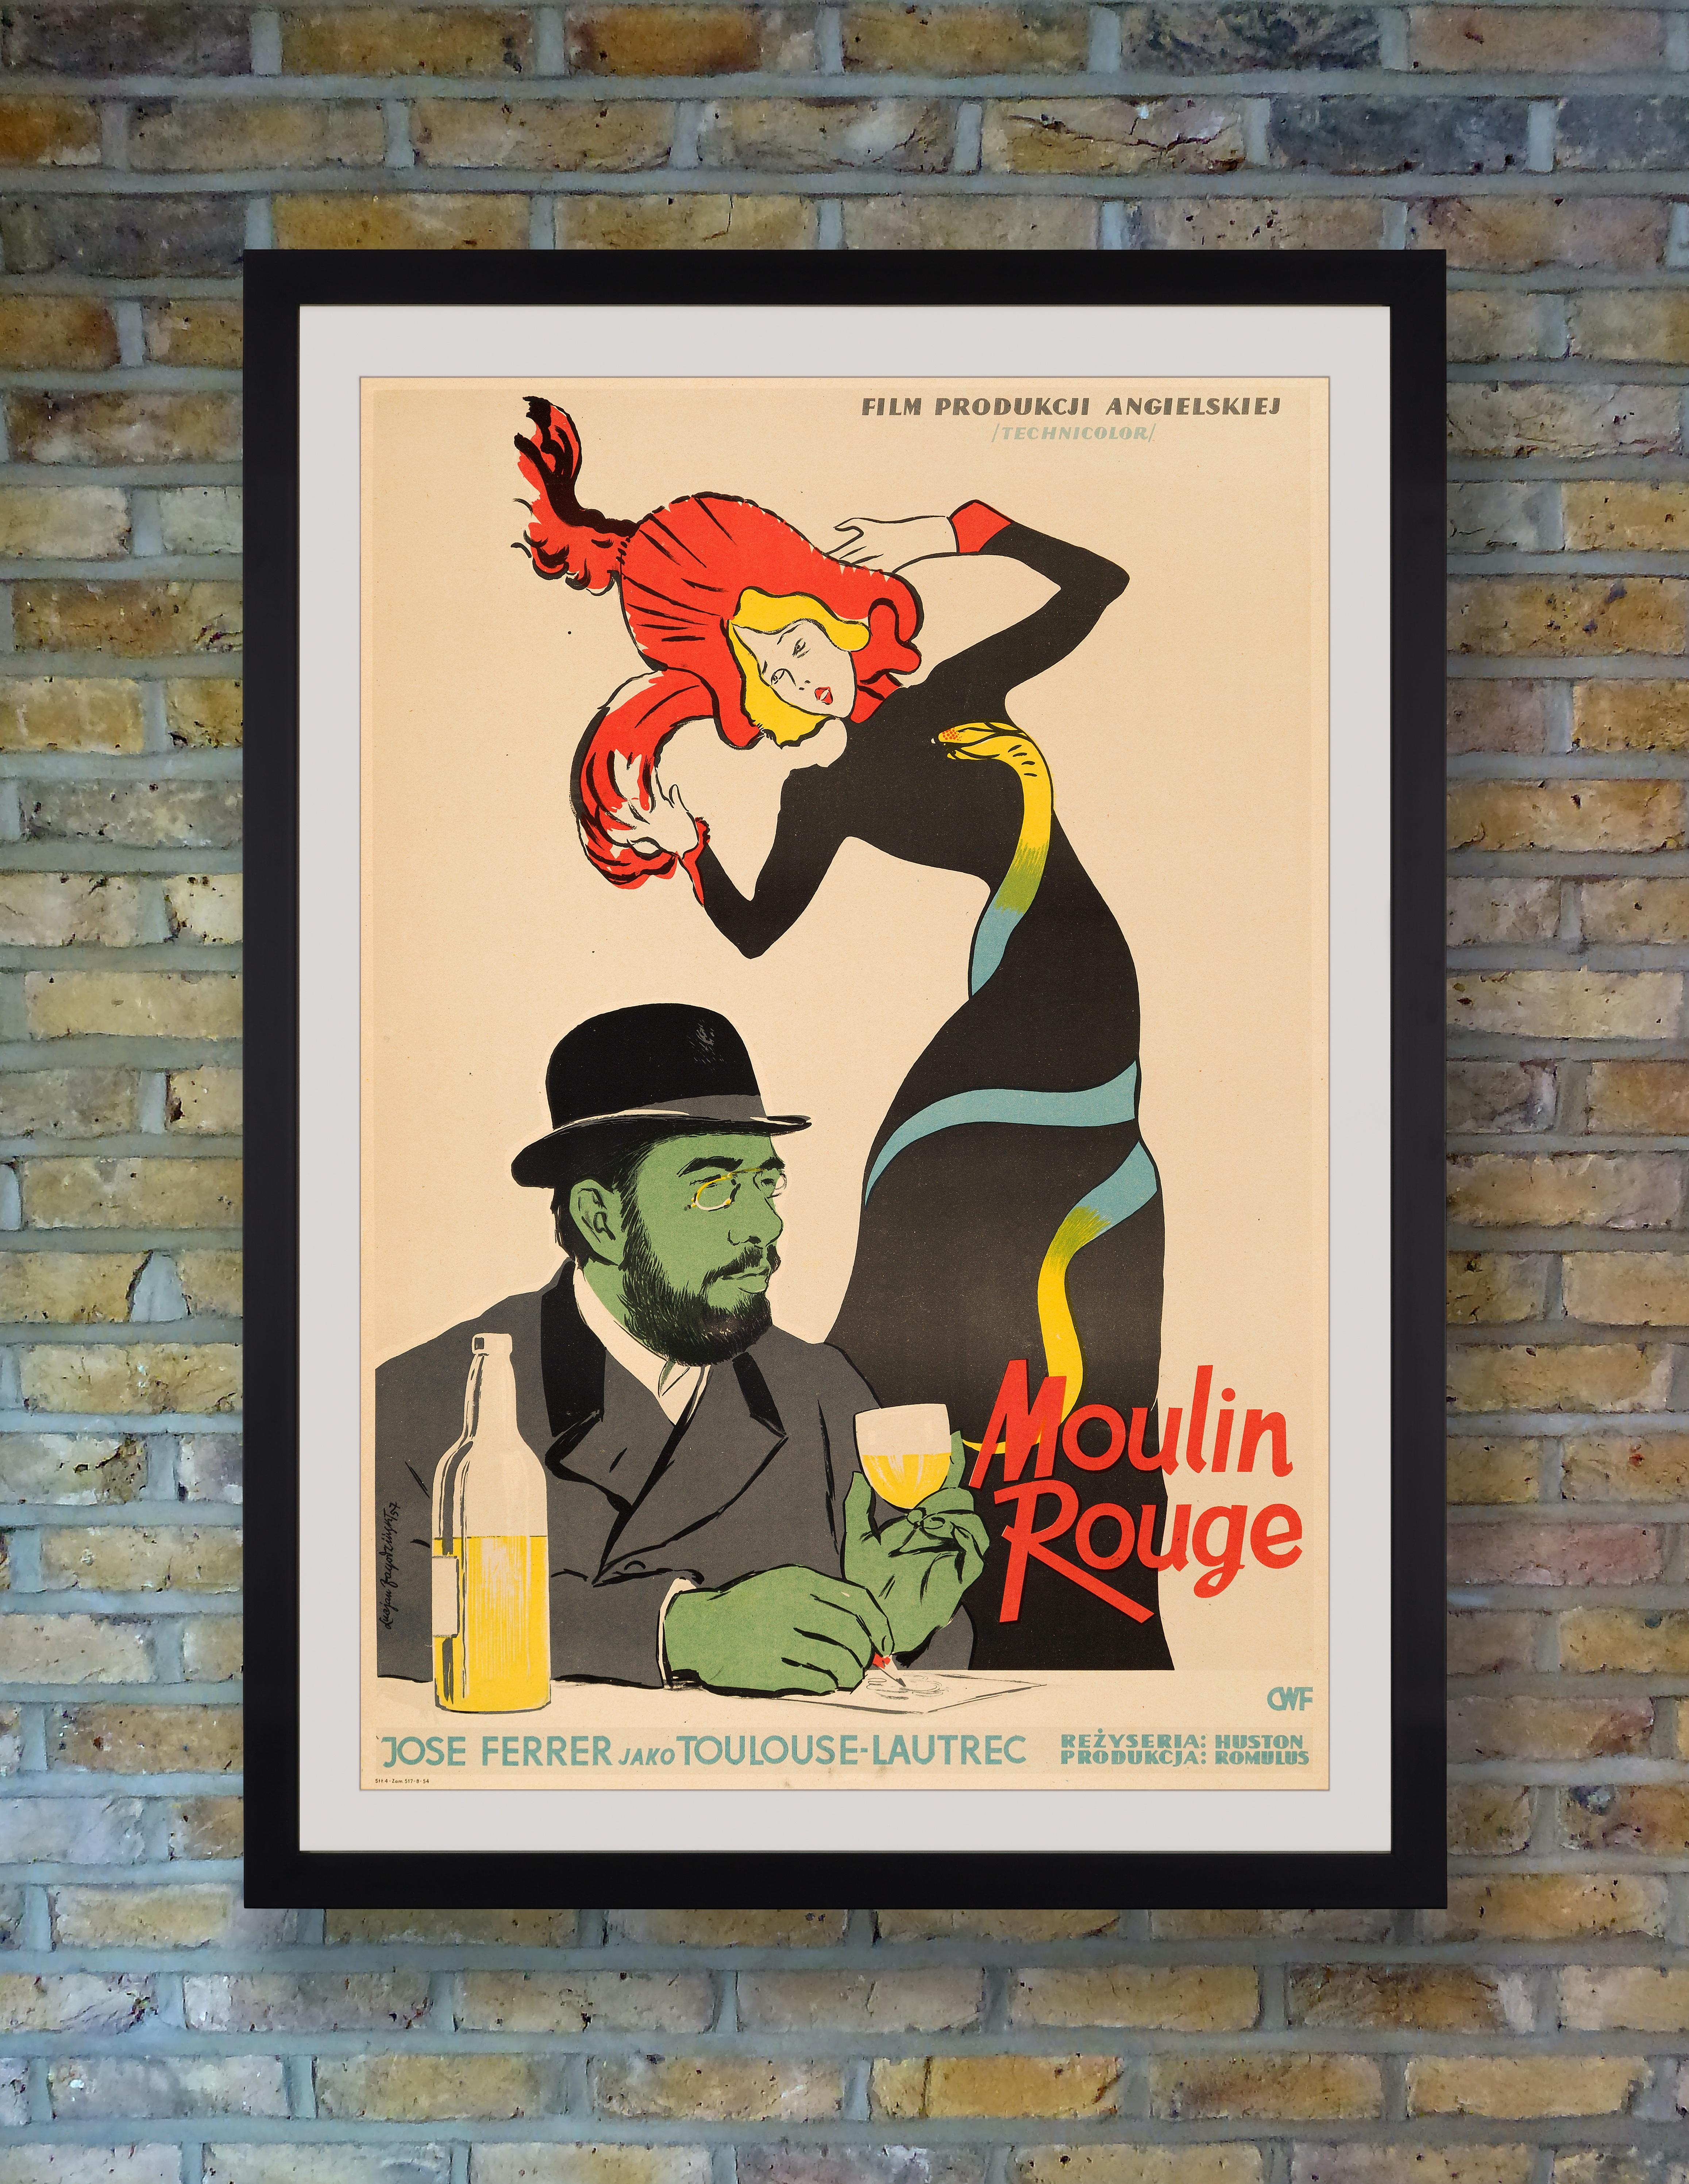 Based on the novel by Pierre La Mure, the 1952 British film 'Moulin Rouge' is a fictionalized account of the life of street artist Henri de Toulouse-Lautrec as he pursues his art in 19th century bohemian Paris and finds solace among the other